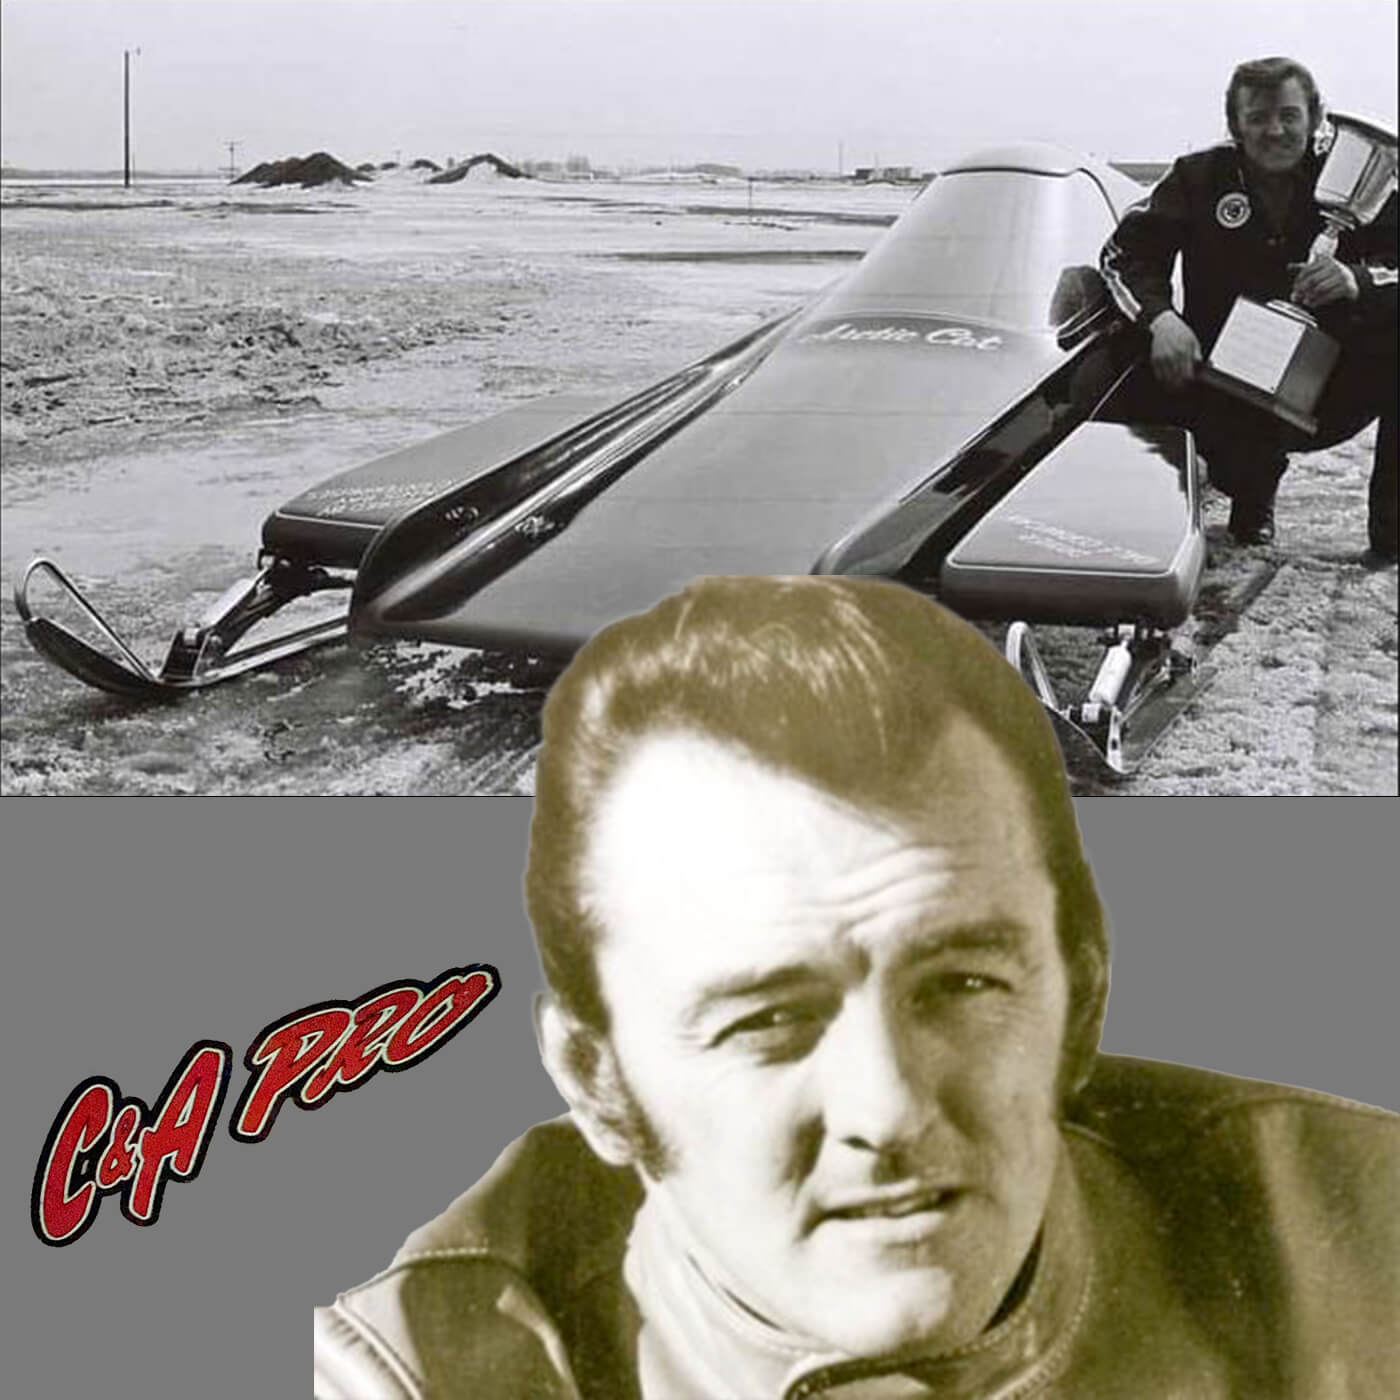 Dale Cormican, legendary snowmobile racer and inventory of C&A Pro Snowmobile Skis.